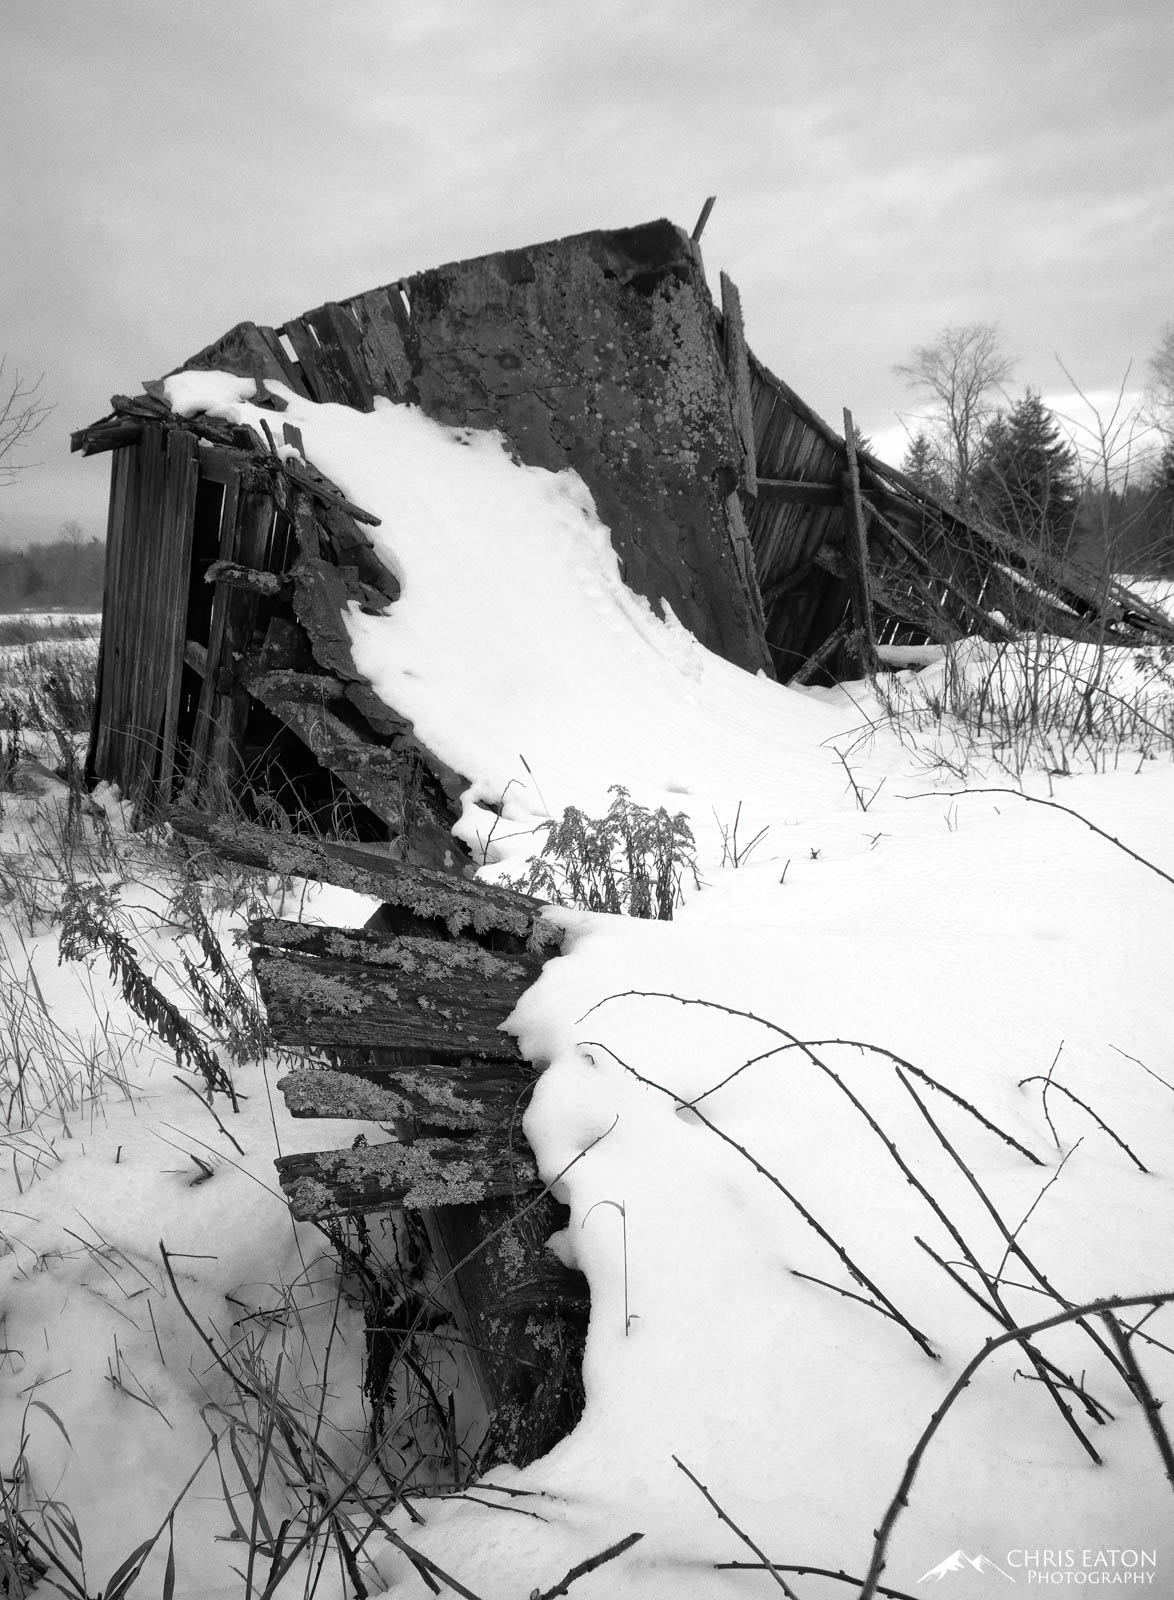 An old barn in the Iron River area of Michigan's Upper Peninsula has collapsed and is in the process of being reclaimed by winter...